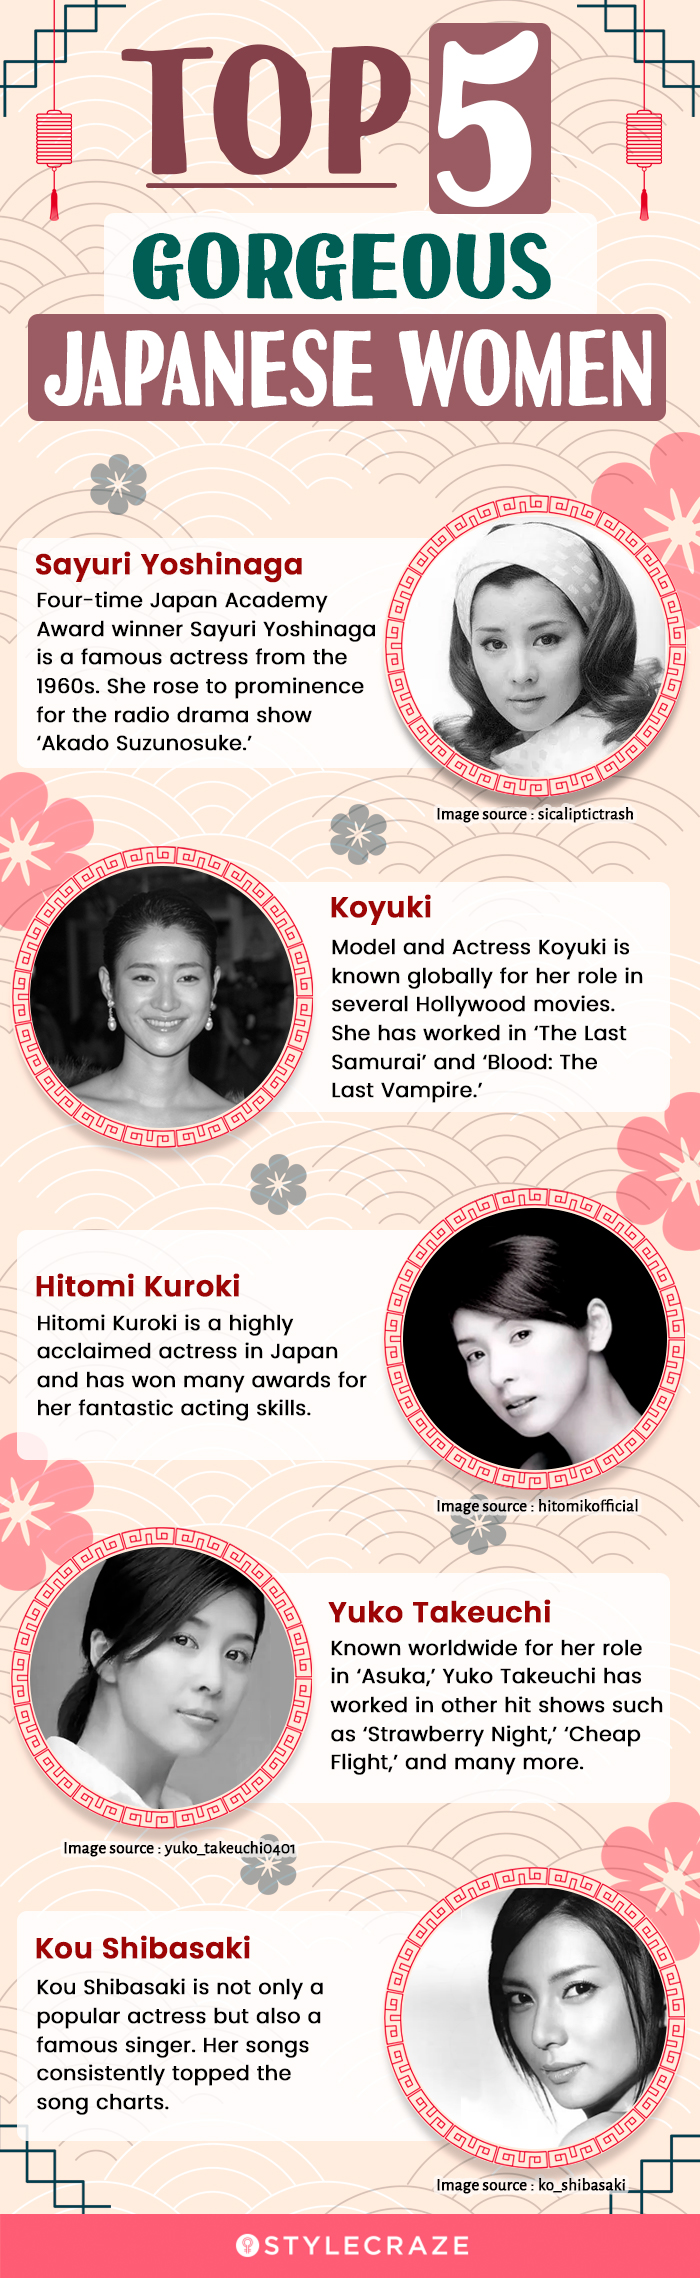 top 5 gorgeous japanese women (infographic)